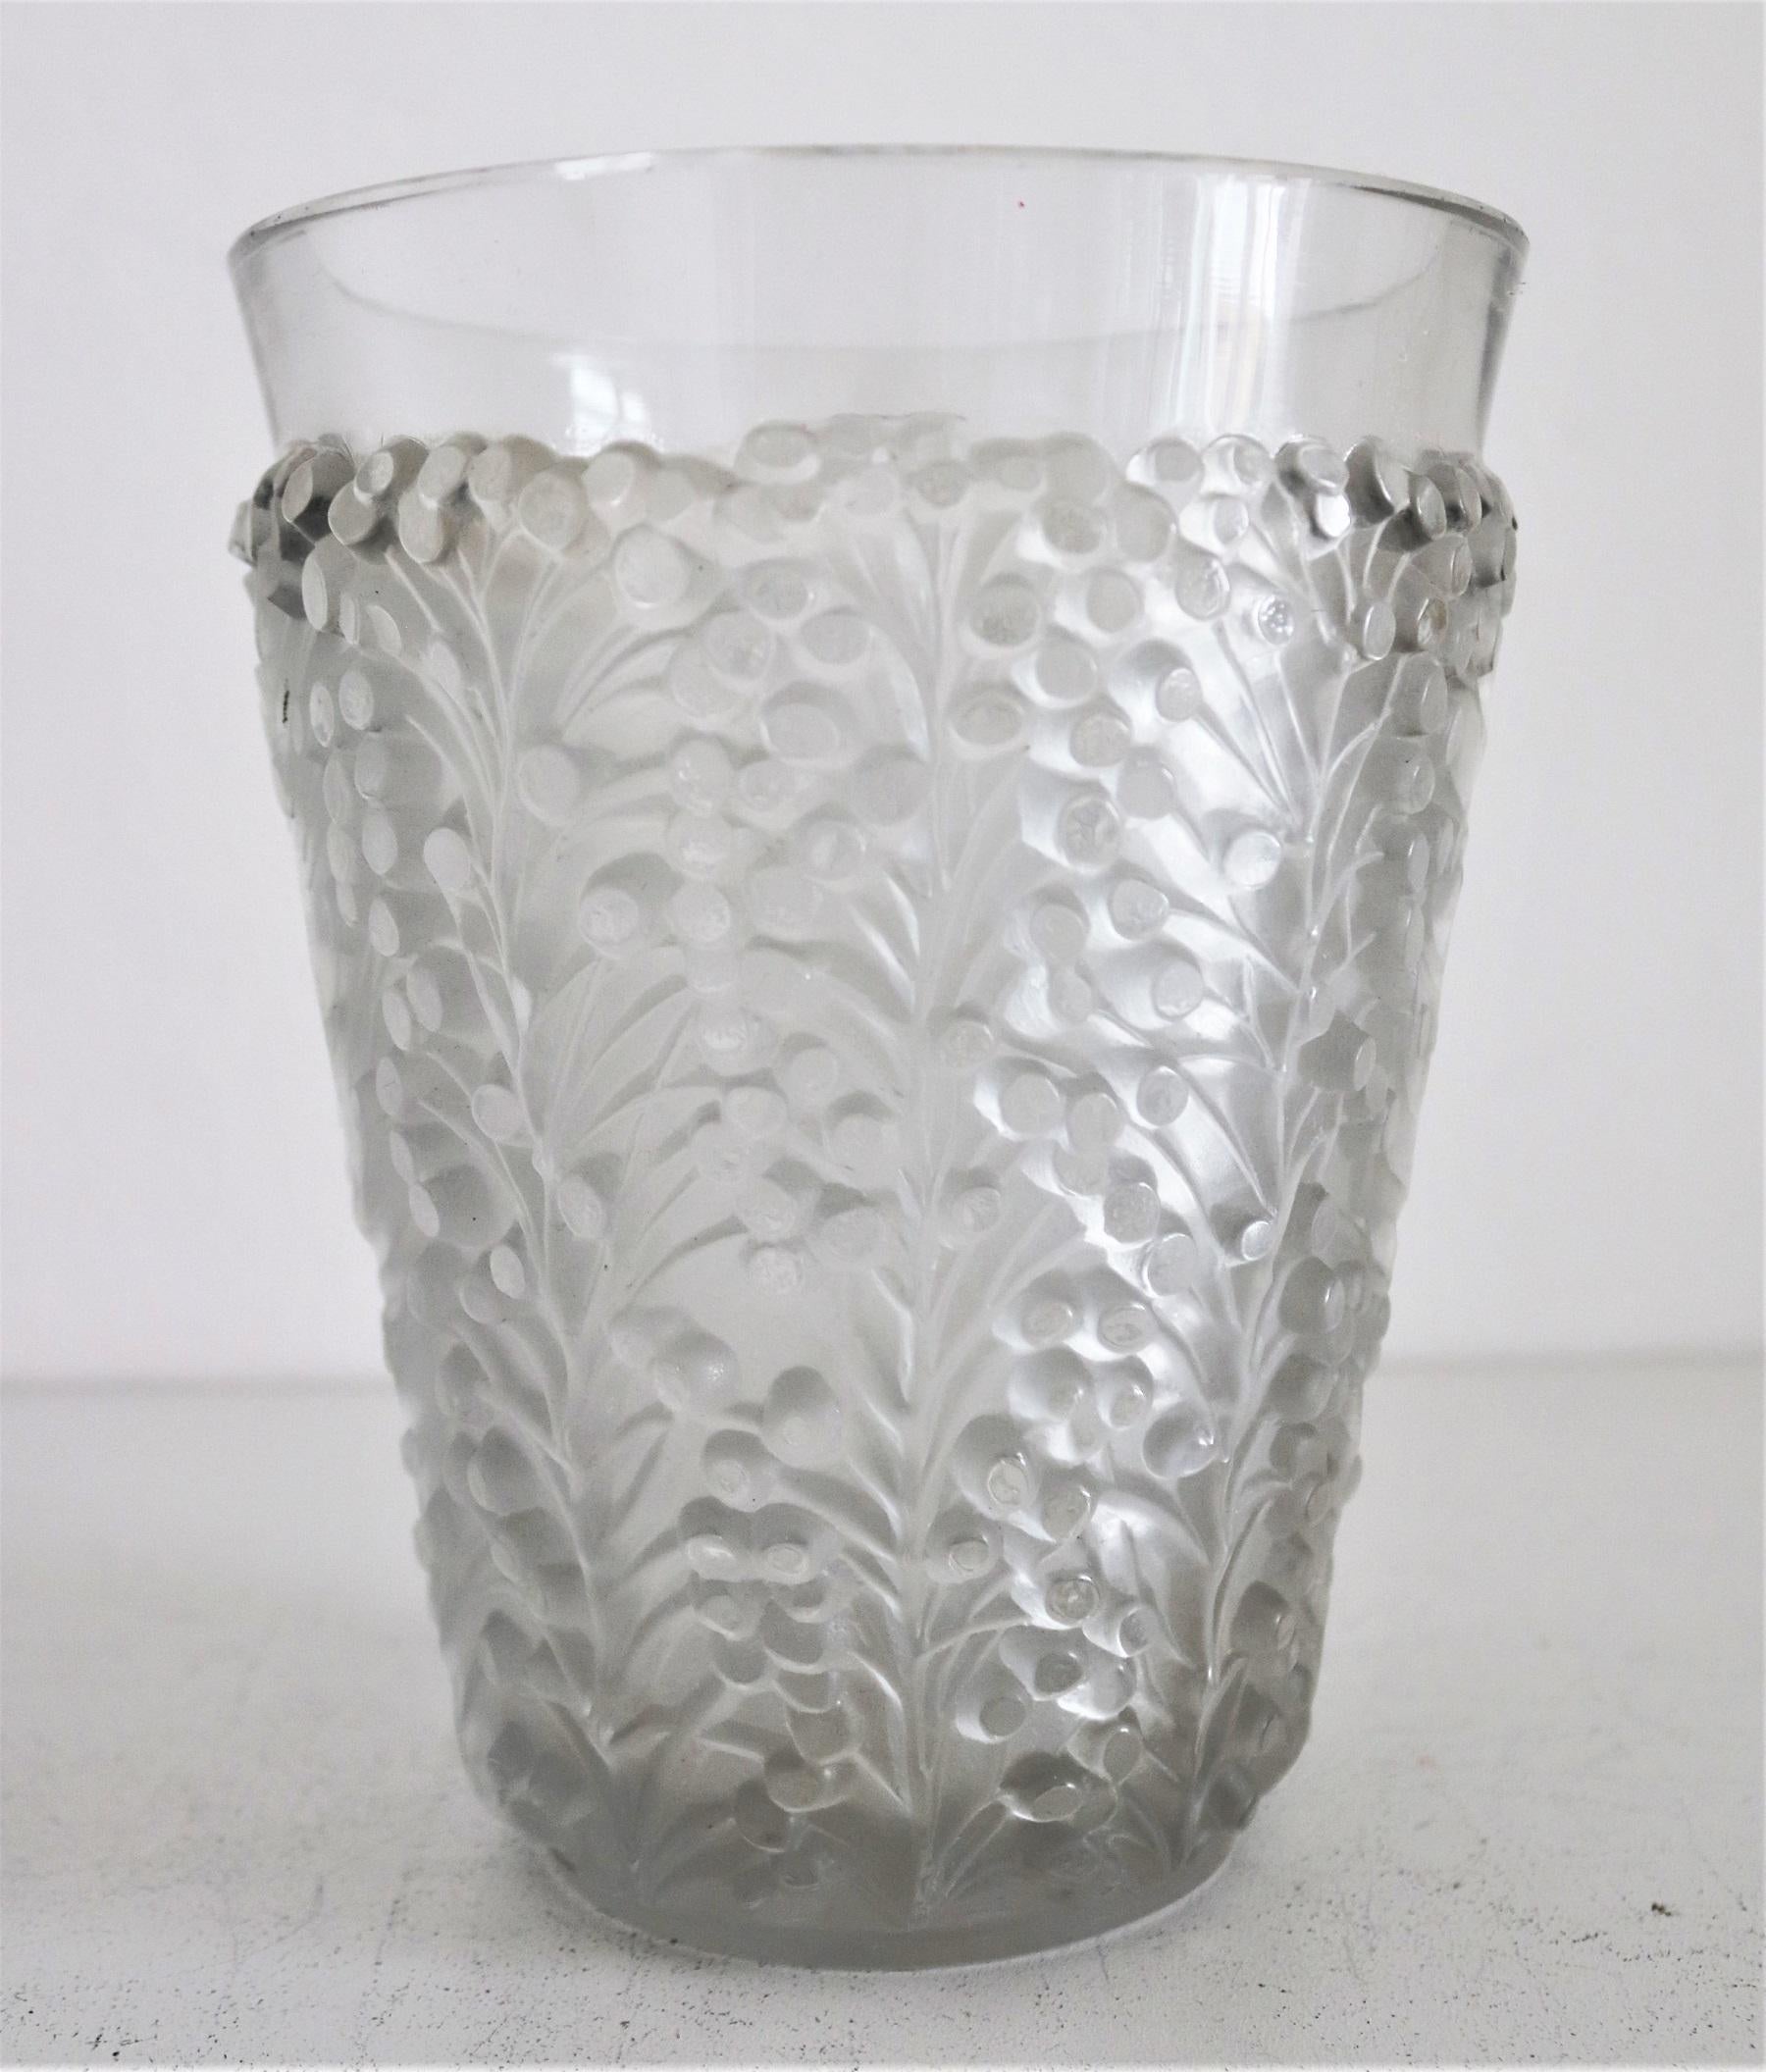 20th Century René Lalique Glass Vase with Frosted Leaves and Berries, France, circa 1937